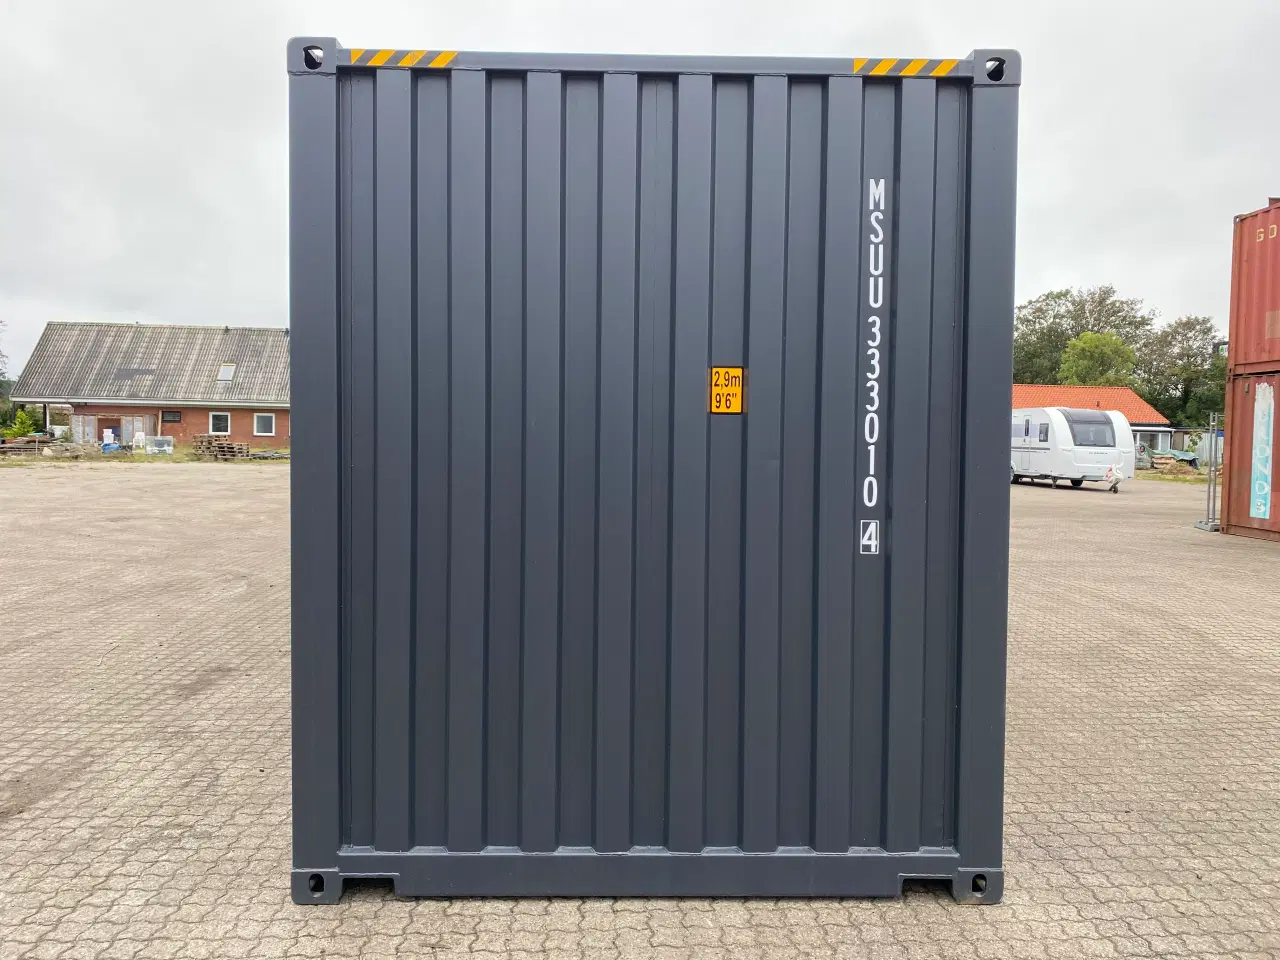 Billede 4 - 20 fods NY - High Cube Container ( extra høj )